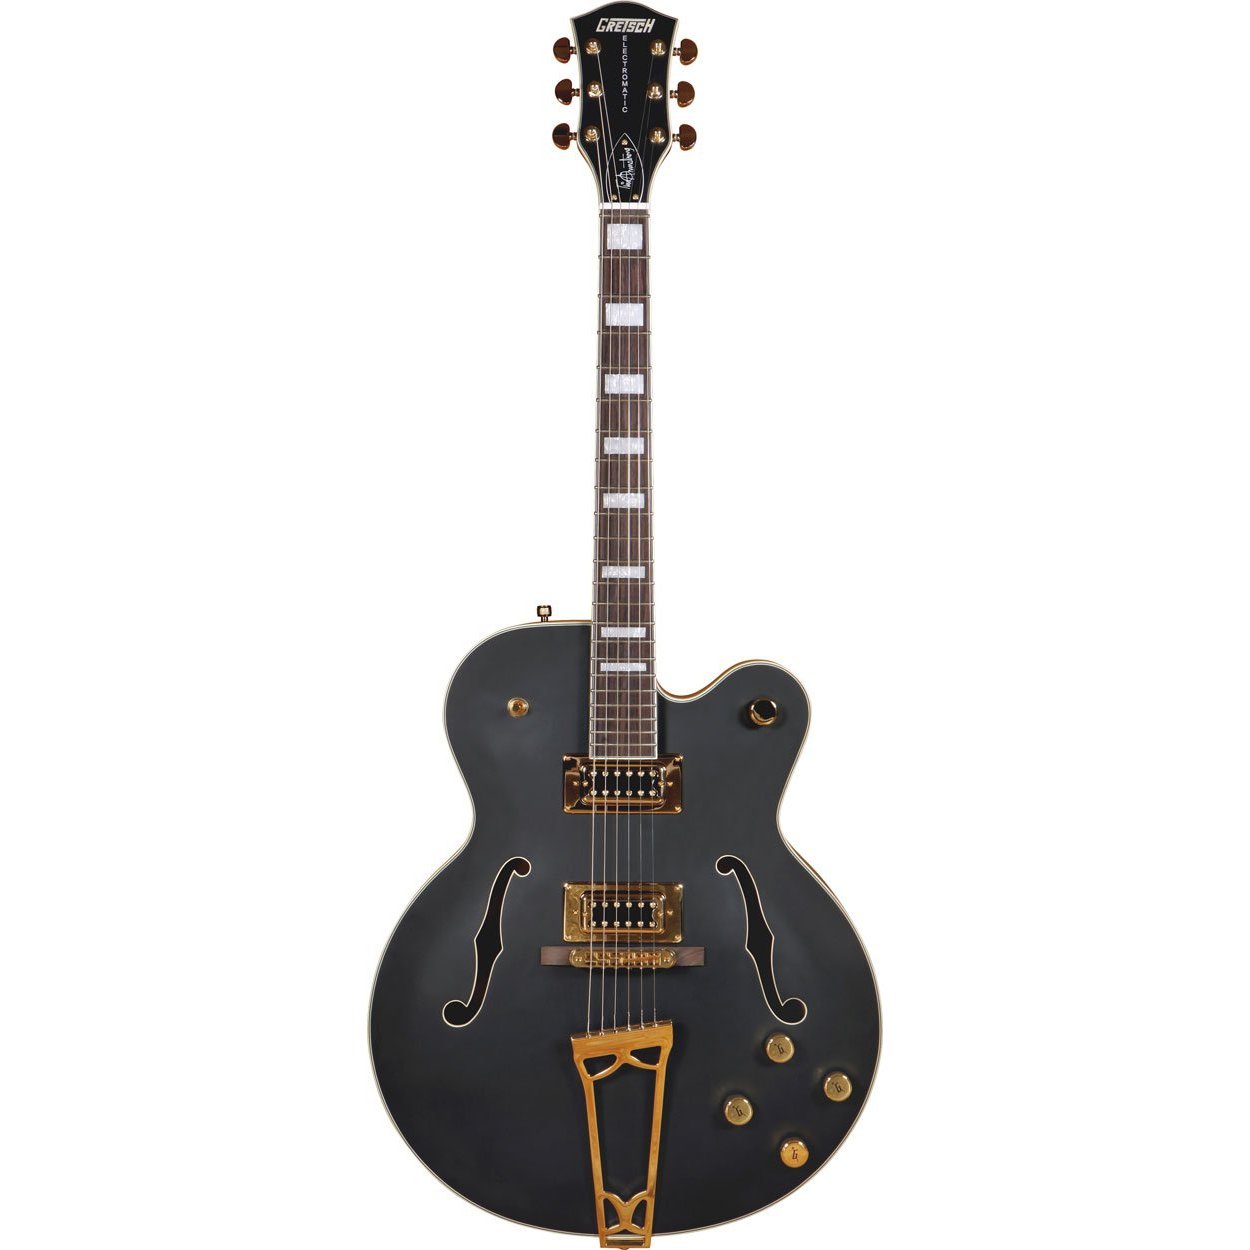 Gretsch G5191BK Tim Armstrong Signature Electromatic Hollow Body Electric Guitar Black-Music World Academy